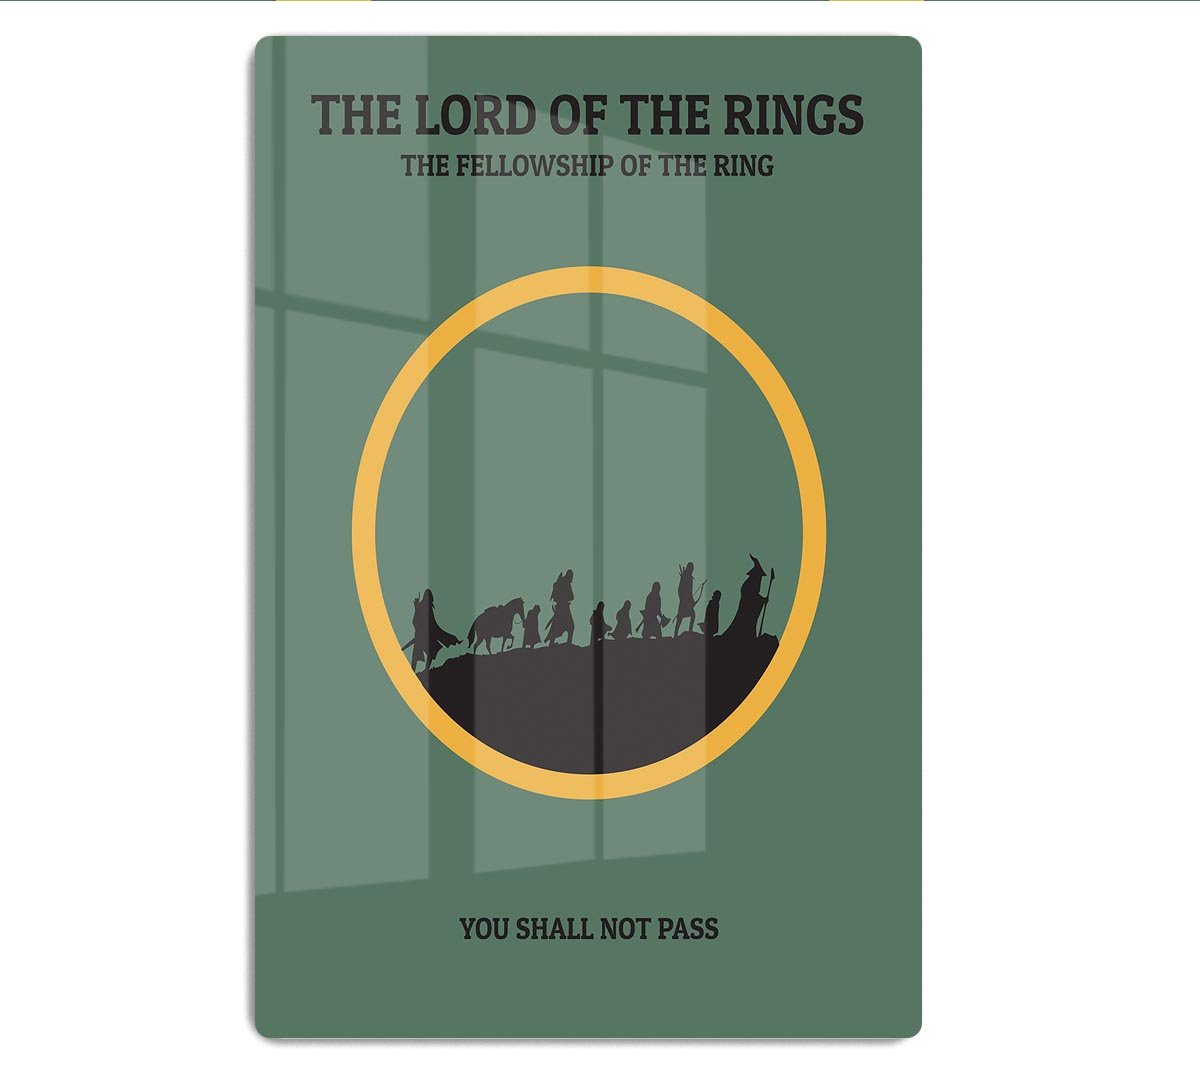 The Lord Of The Rings Fellowship If The Ring Minimal Movie HD Metal Print